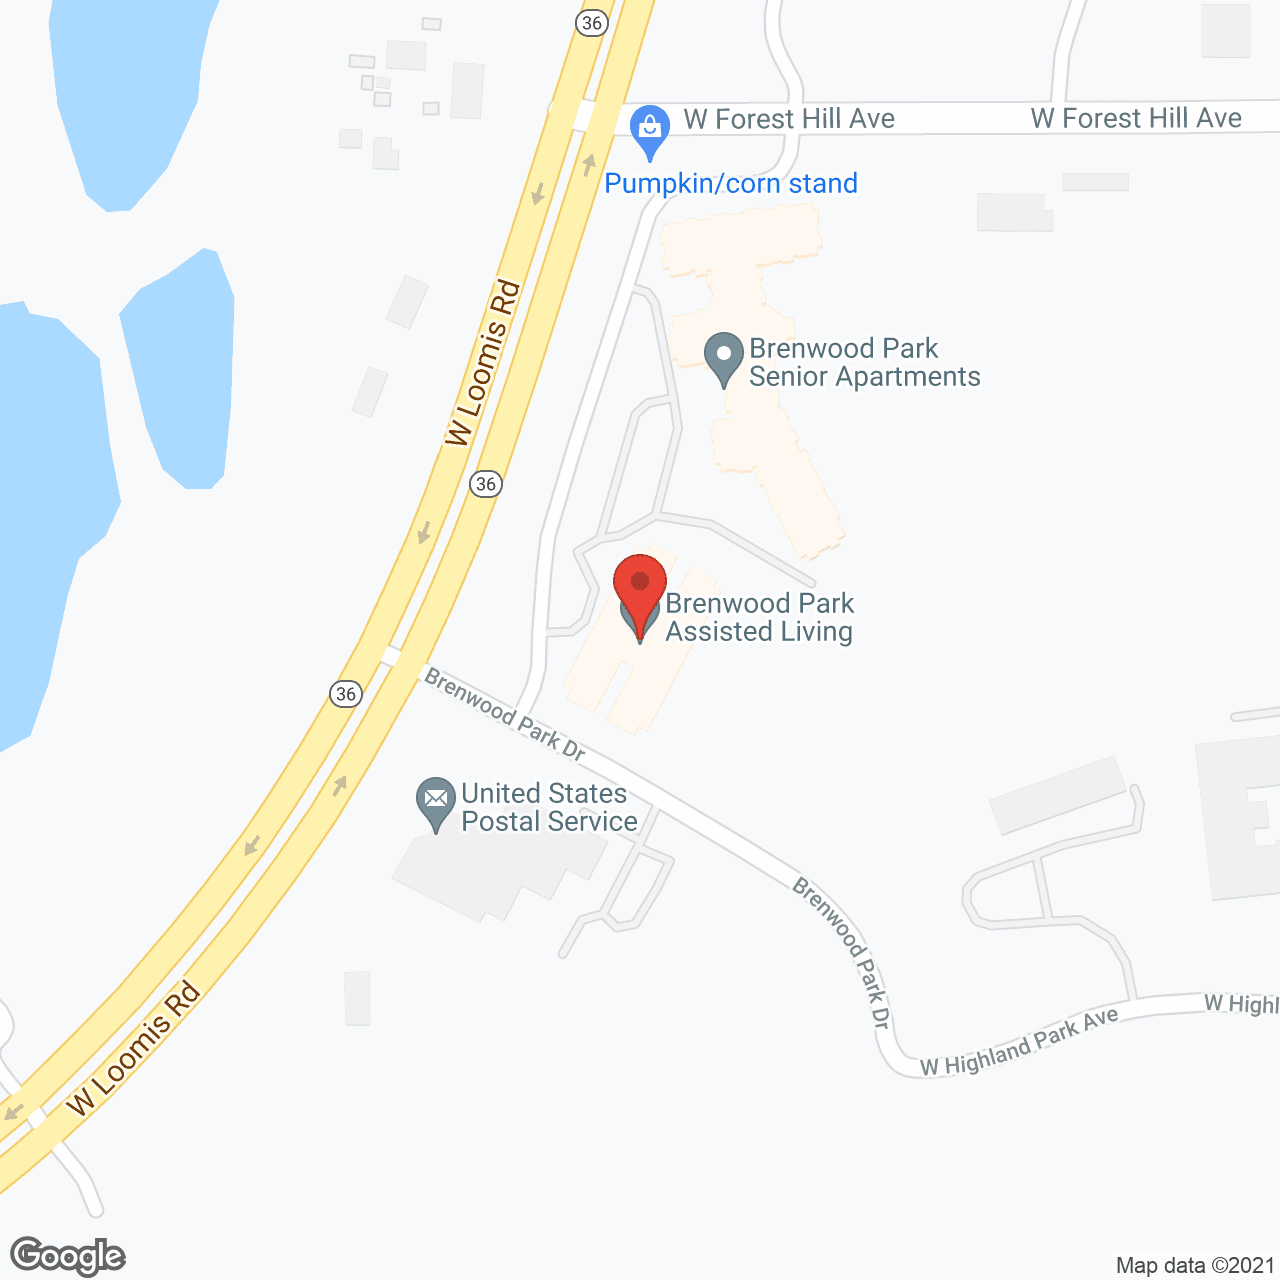 Brenwood Park Assisted Living in google map